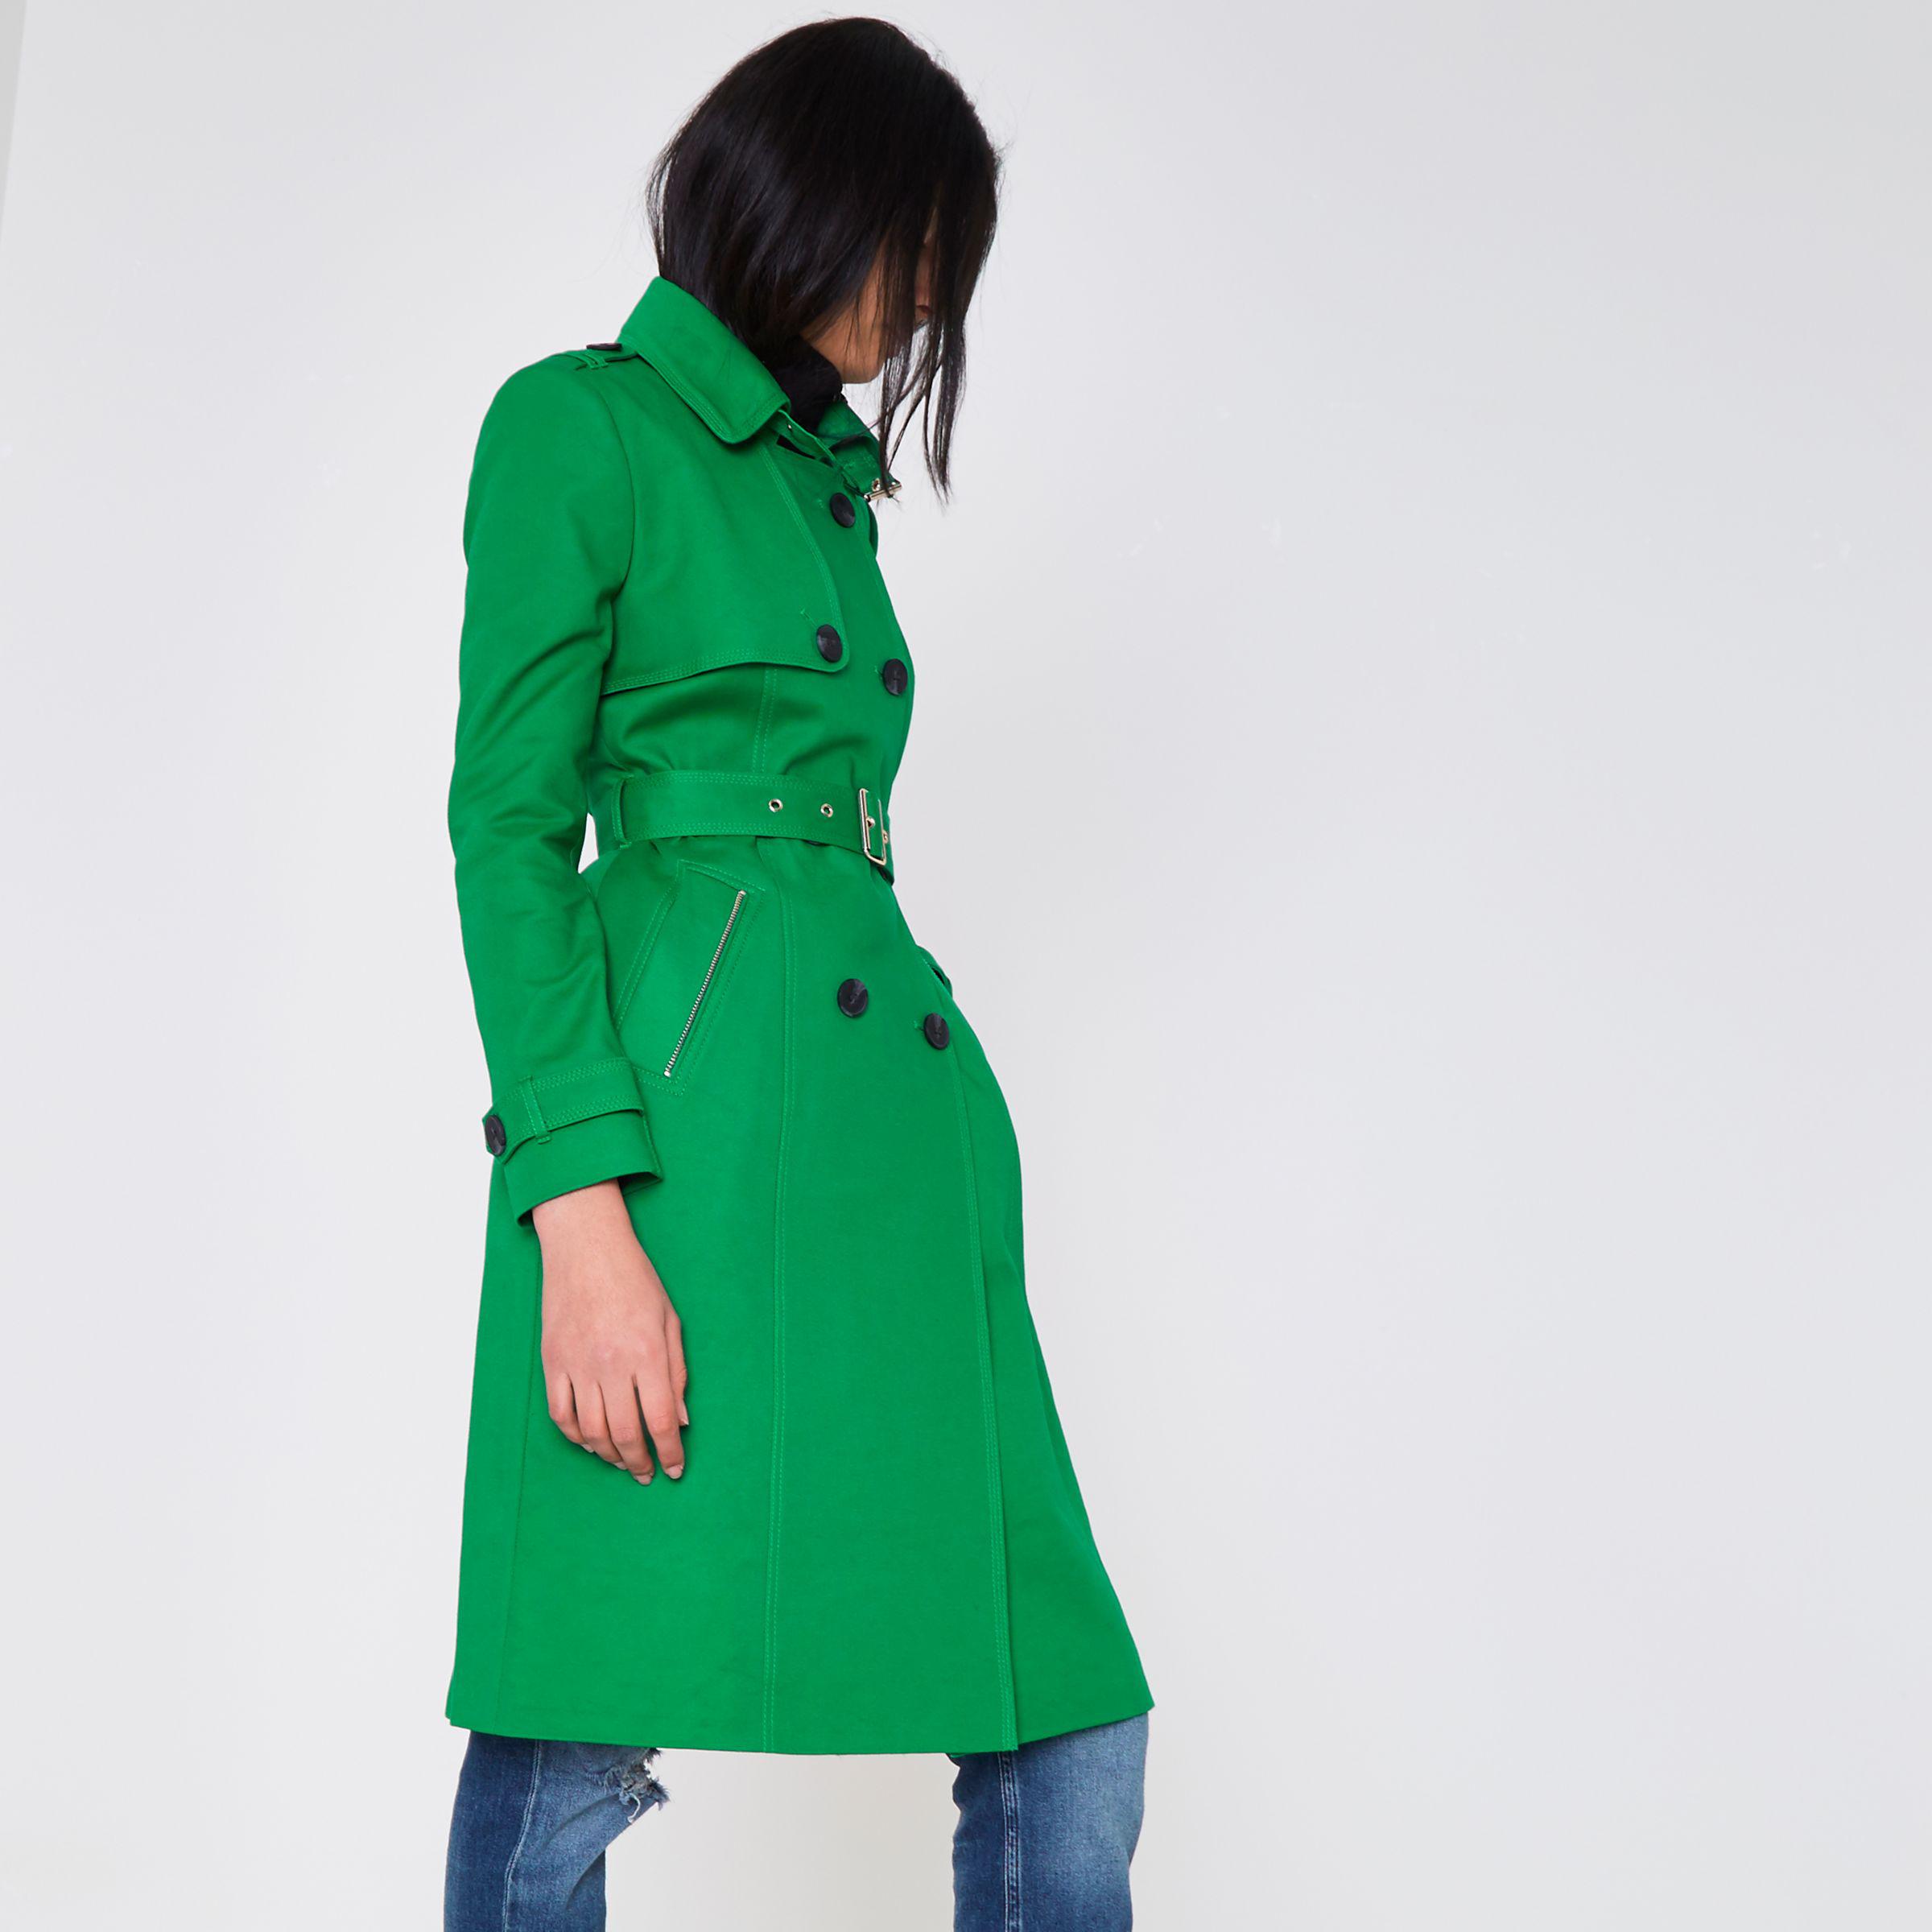 River Island Bright Green Belted Trench Coat | Lyst